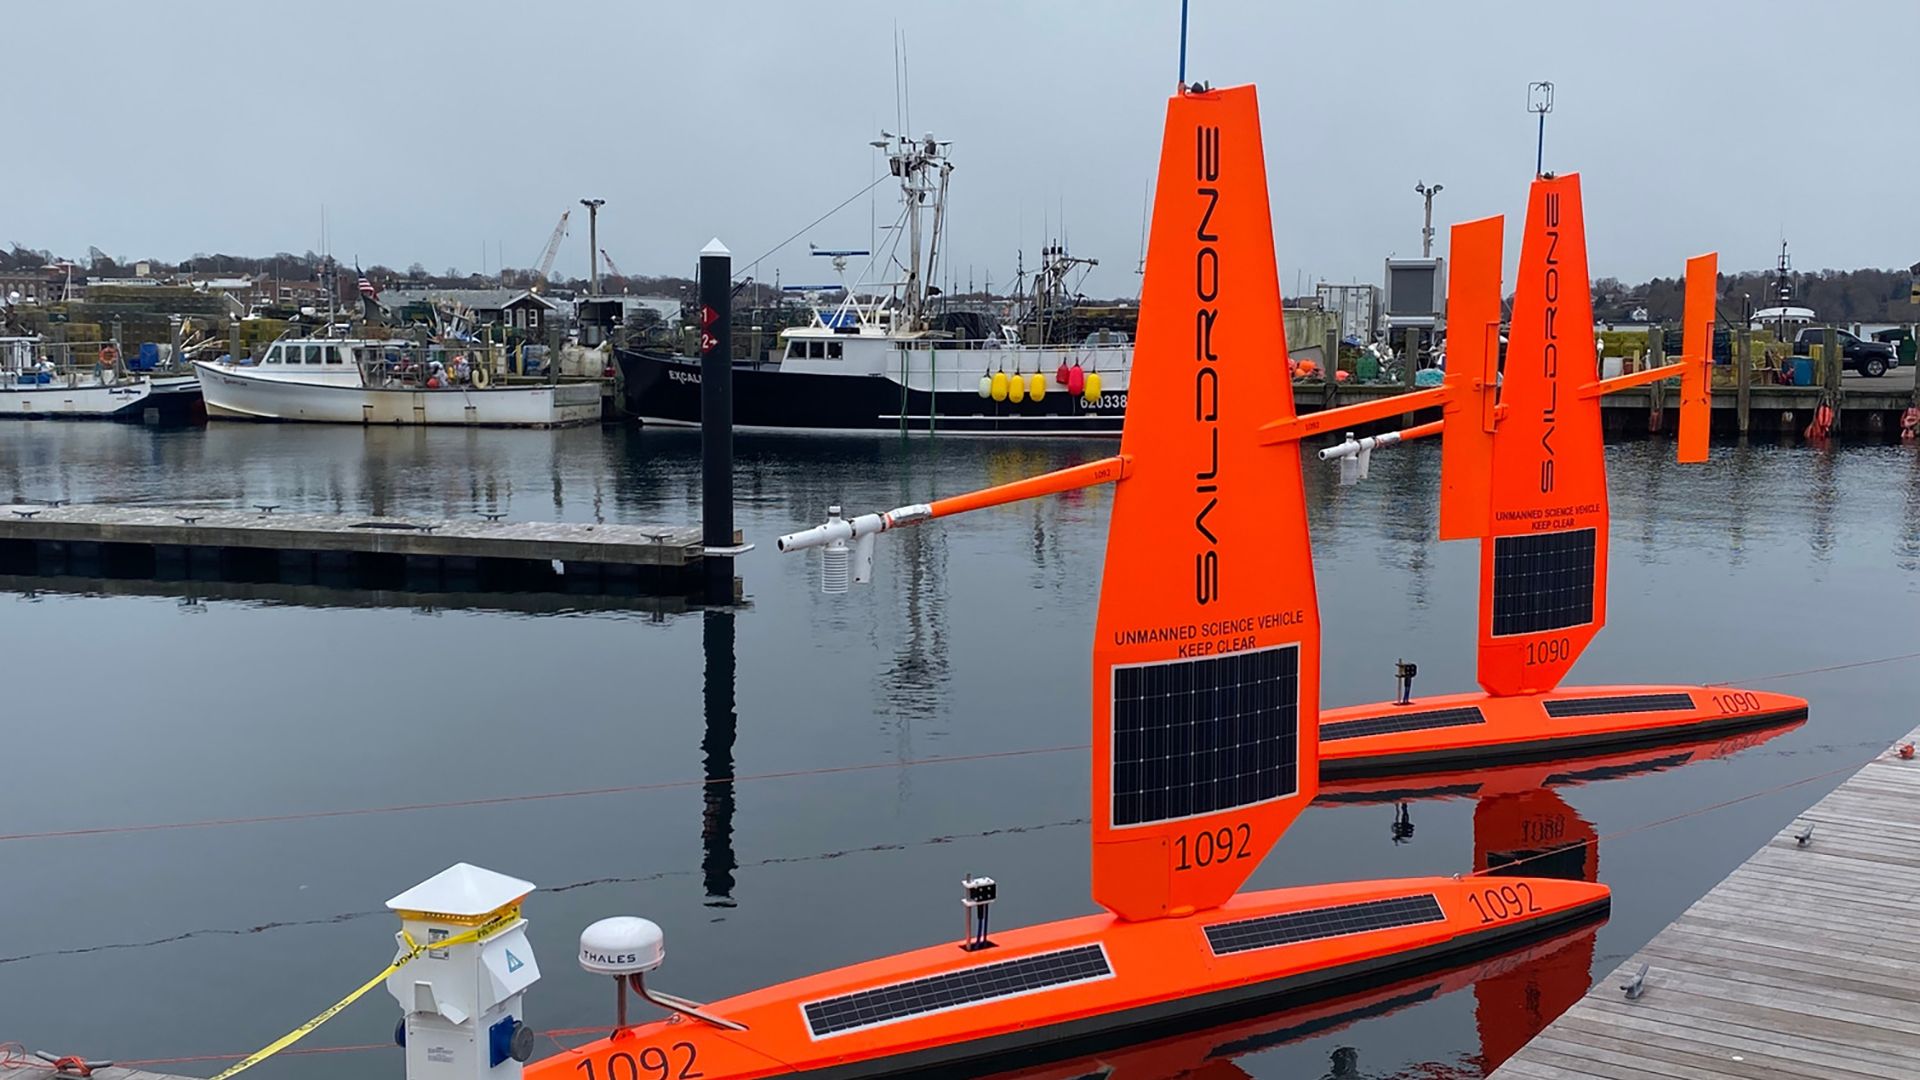 The Saildrones can handle ocean conditions that a manned ship wouldn't be able to tolerate.